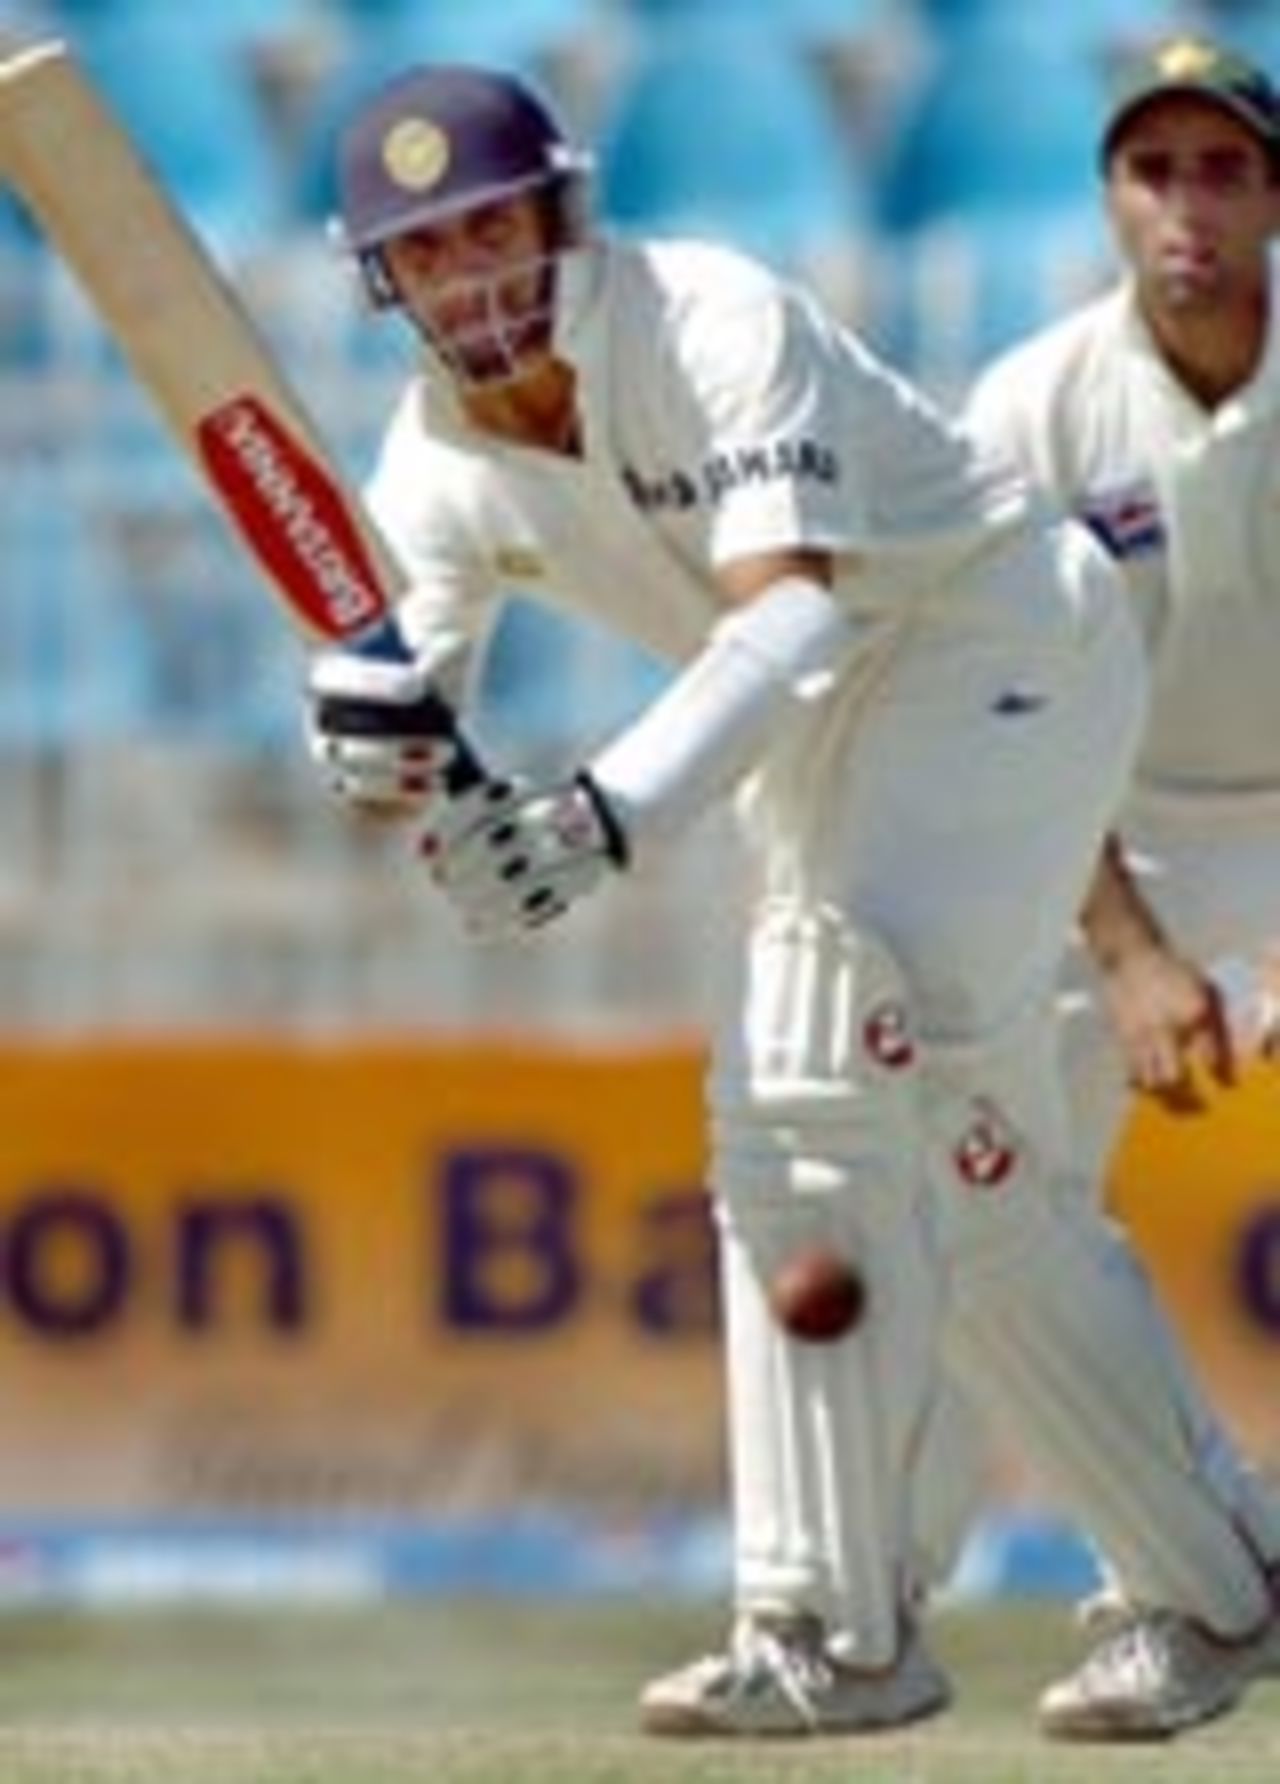 Rahul Dravid plays the flick en route to his double-century, Pakistan v India, 3rd Test, Rawalpindi, 3rd day, April 15, 2004